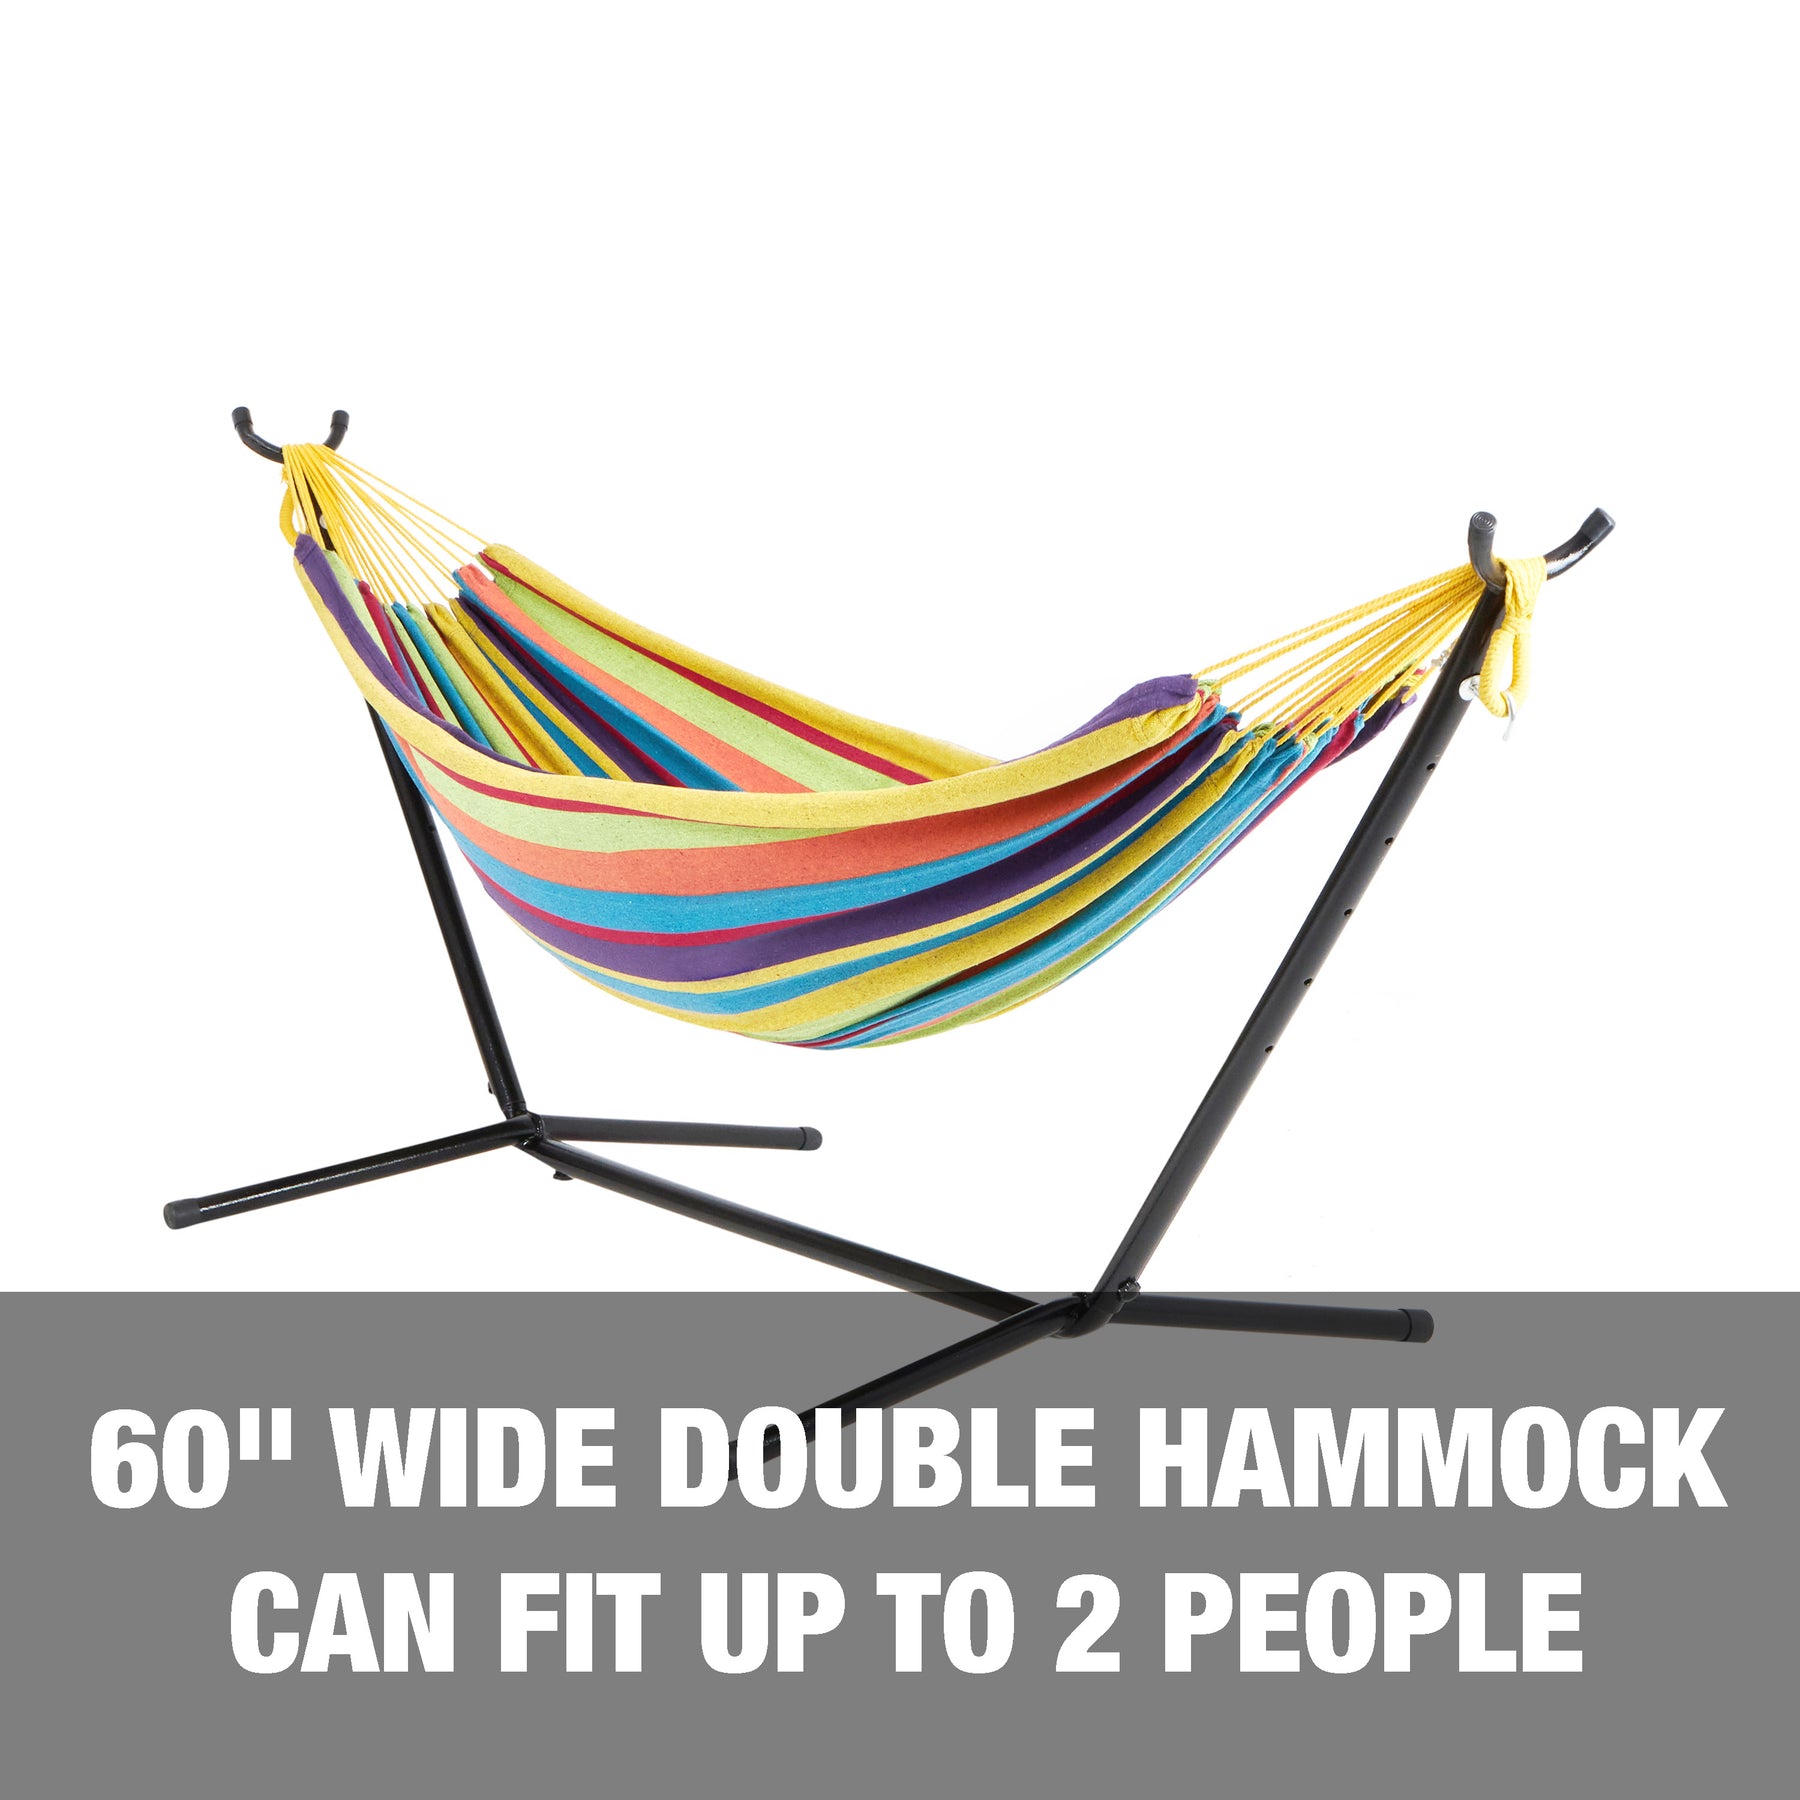 Bliss Hammocks 60-inch Wide Double Hammock with Stand can fit up to 2 people